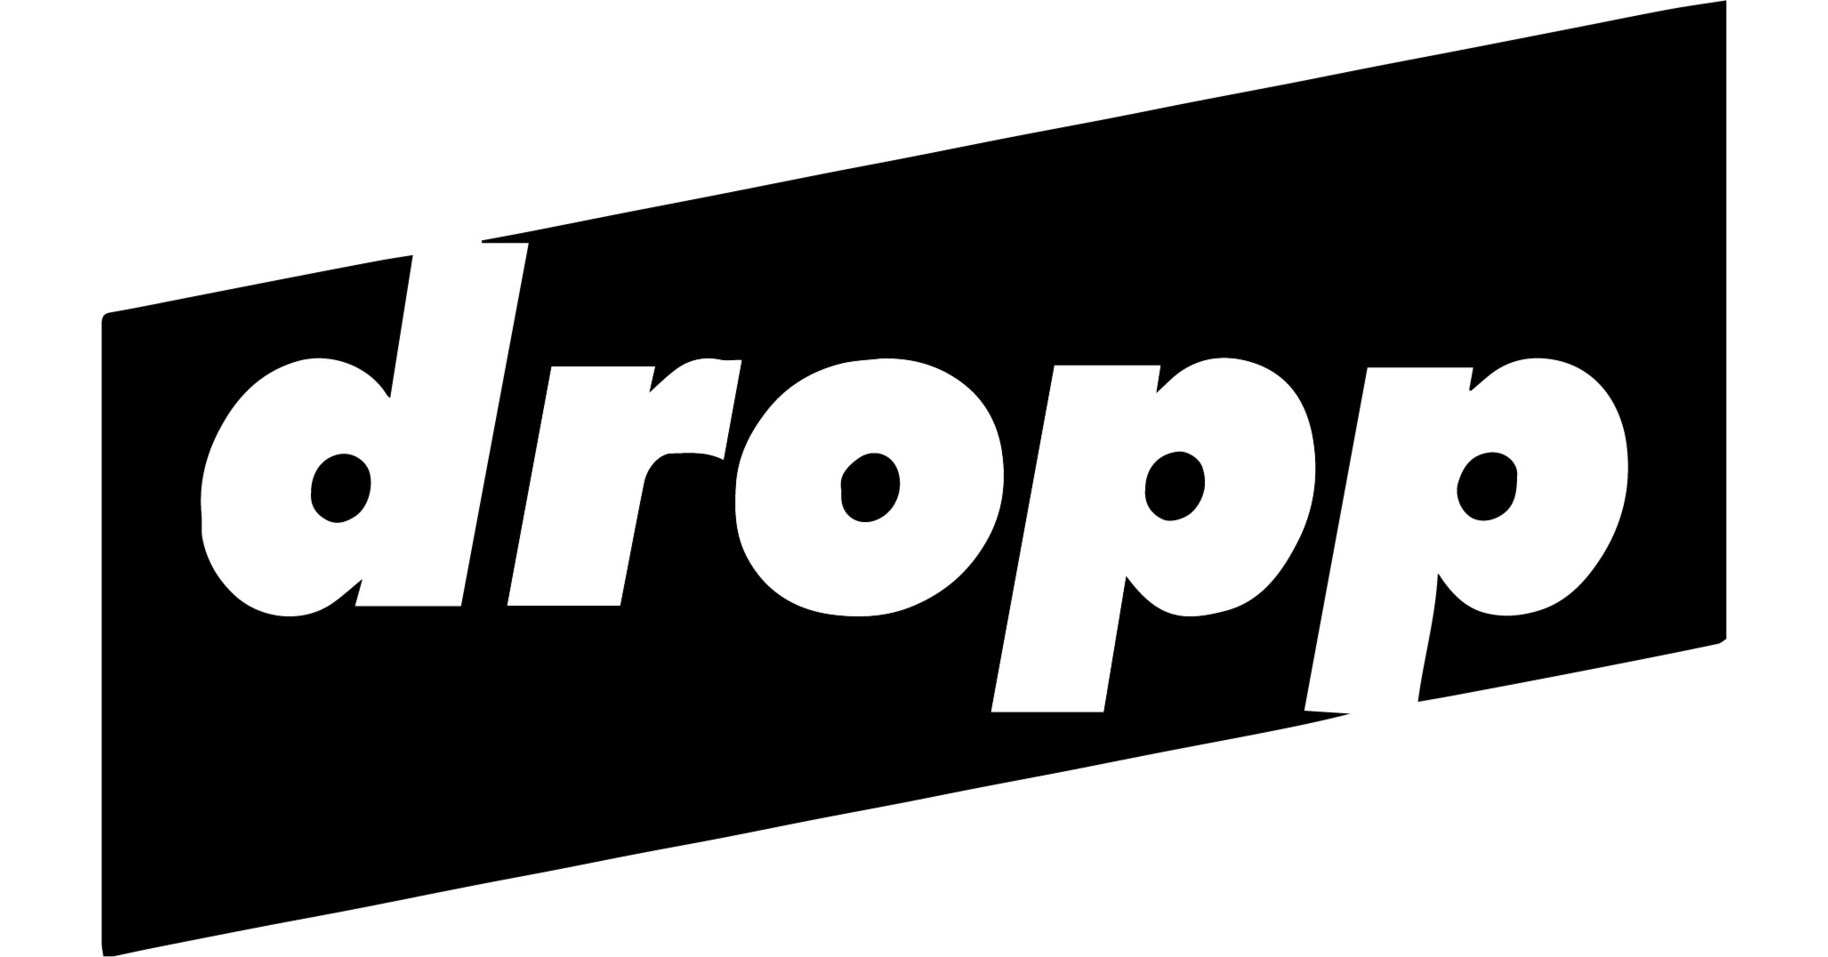 droppTV, the World's First Shoppable Streaming Video Platform, Launches